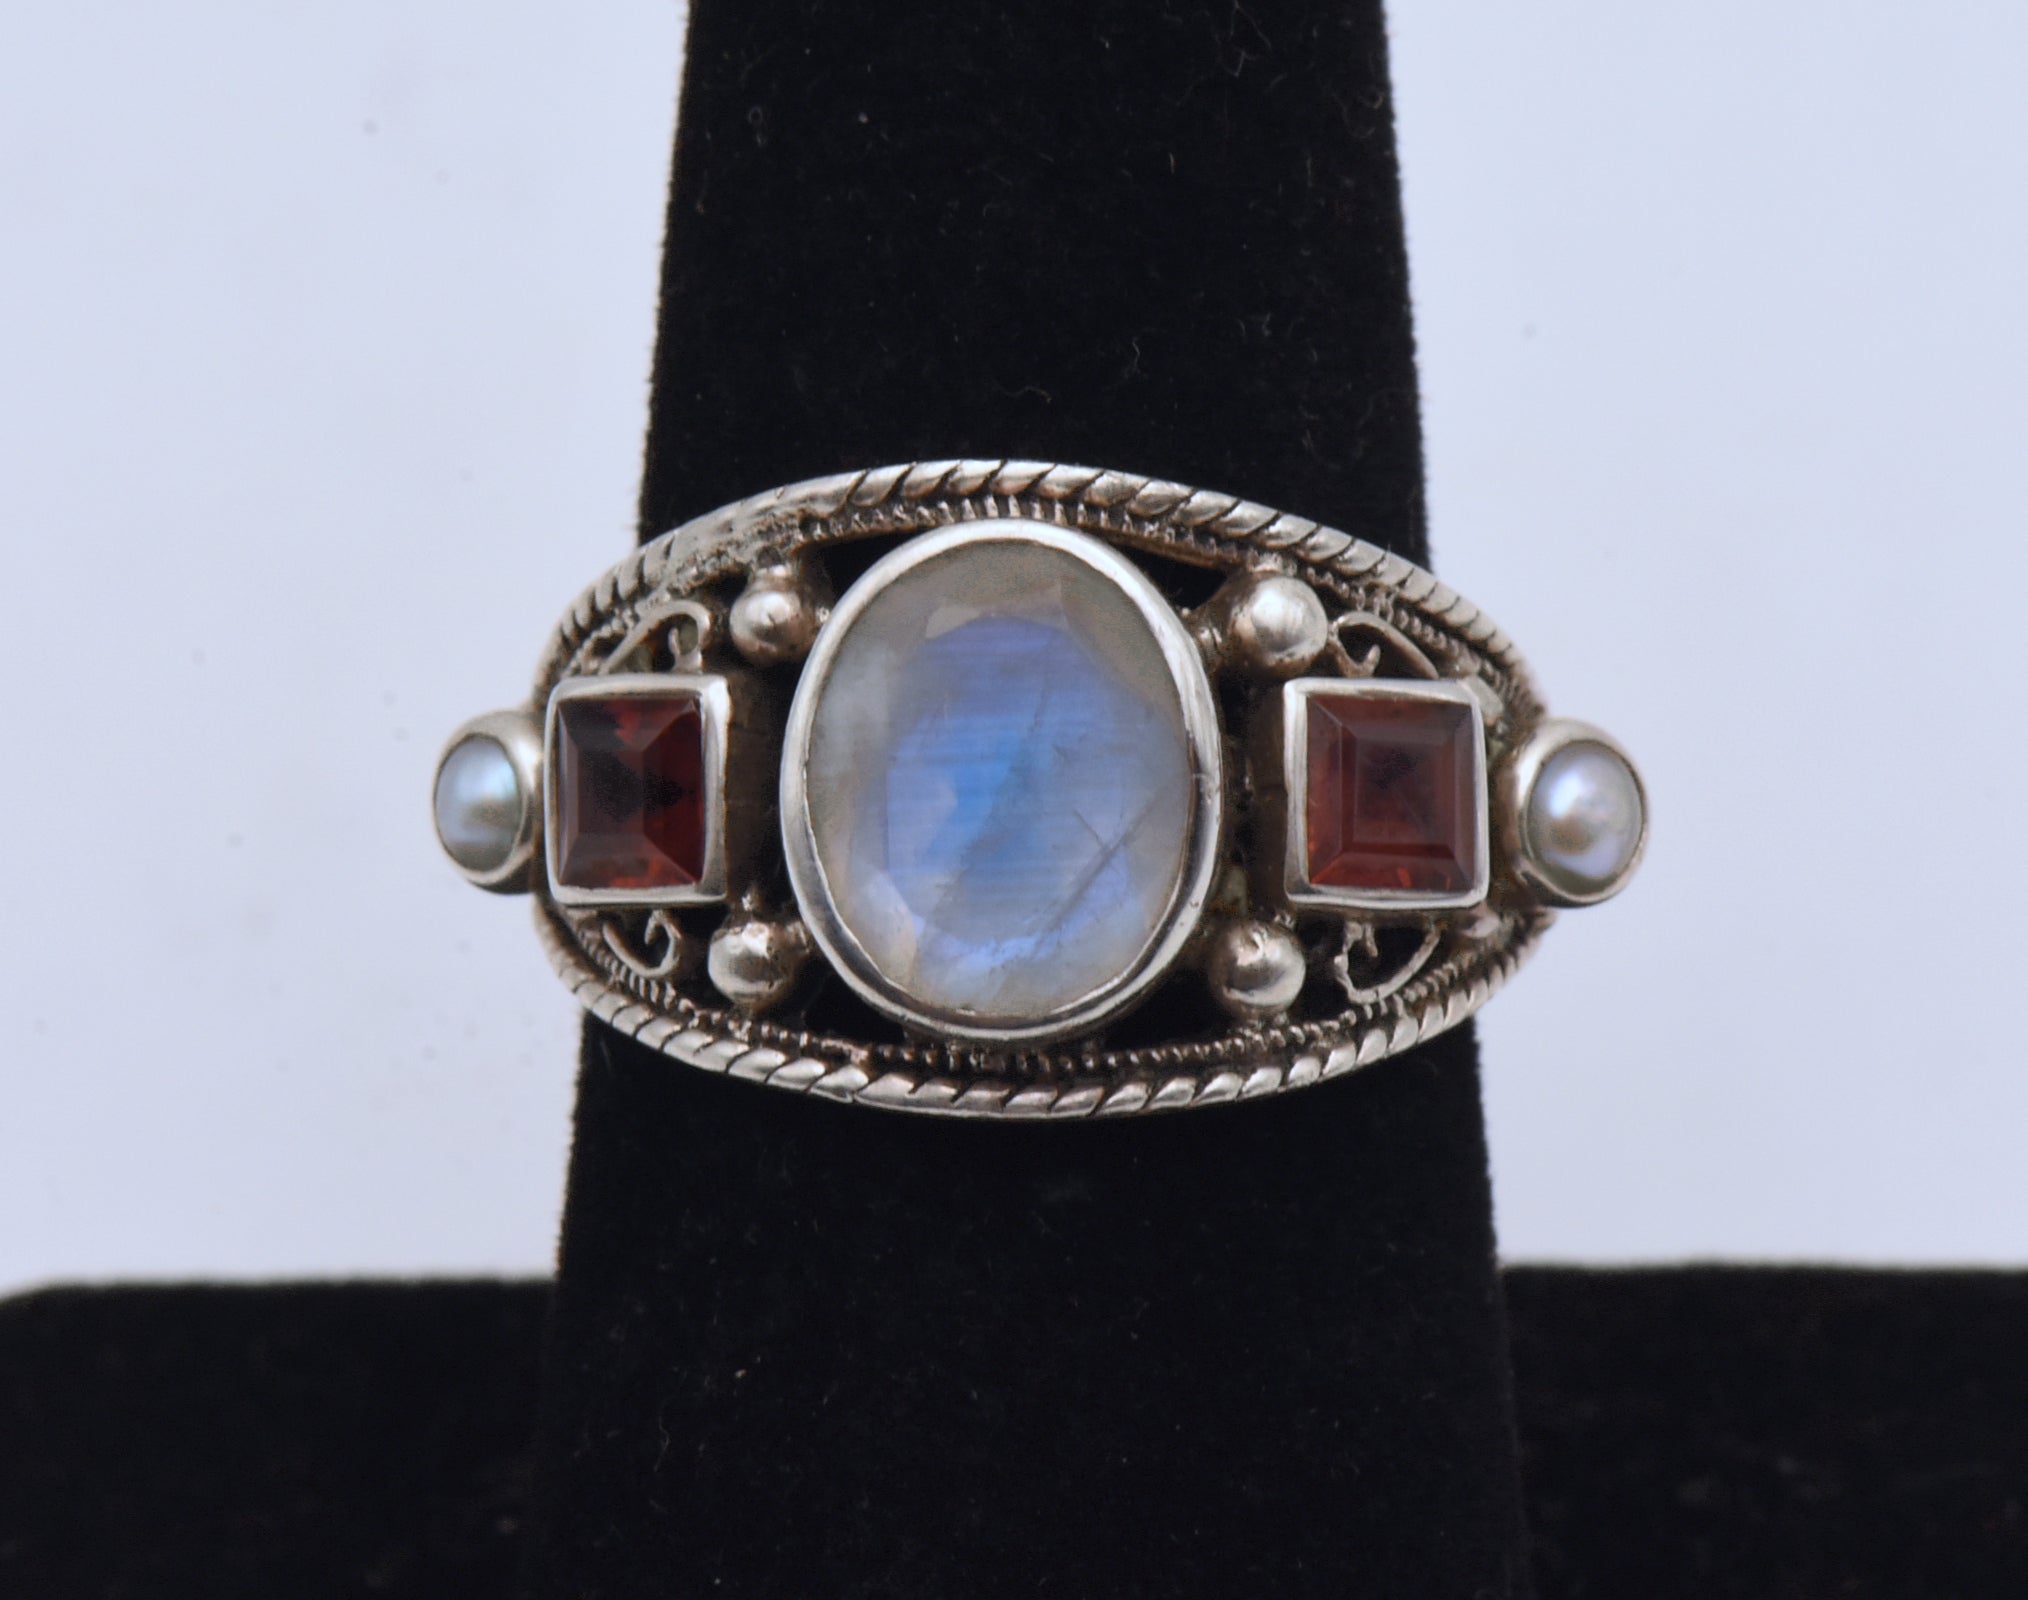 Nicky Butler - Vintage Moonstone, Garnets and Pearls Sterling Silver Ring - Size 7